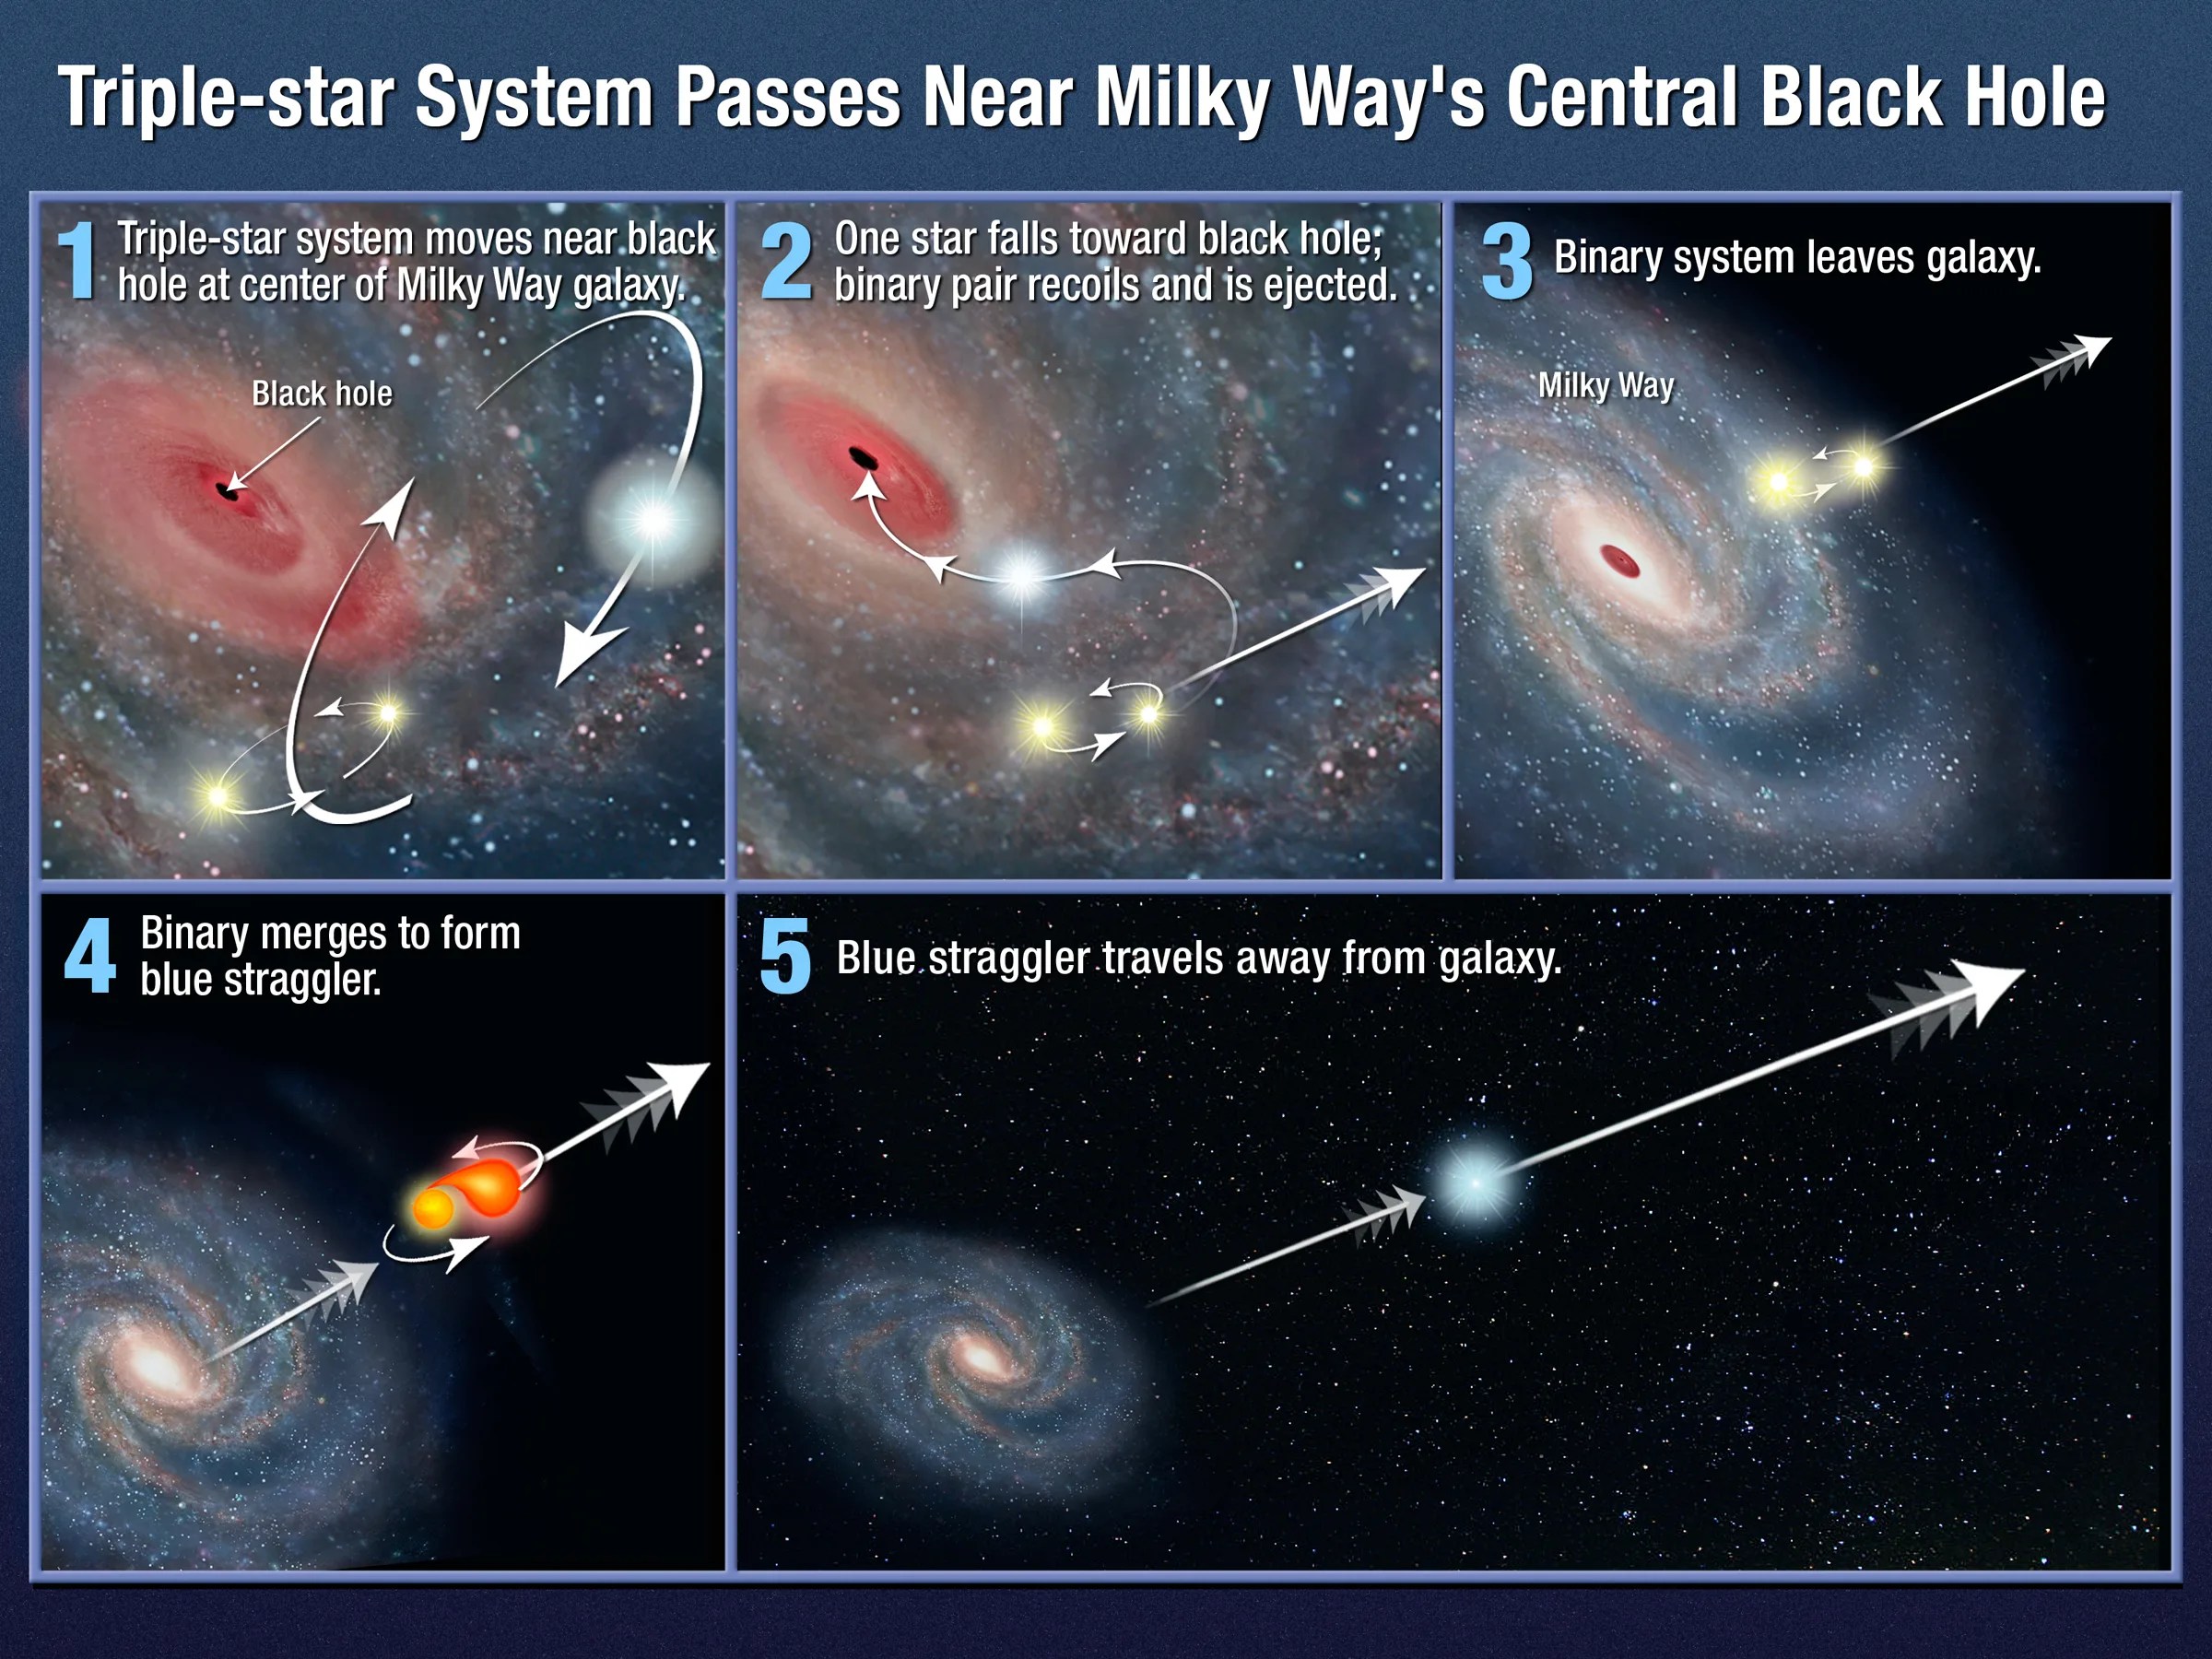 Triple-star system passes near Milky Way's Central Black Hole